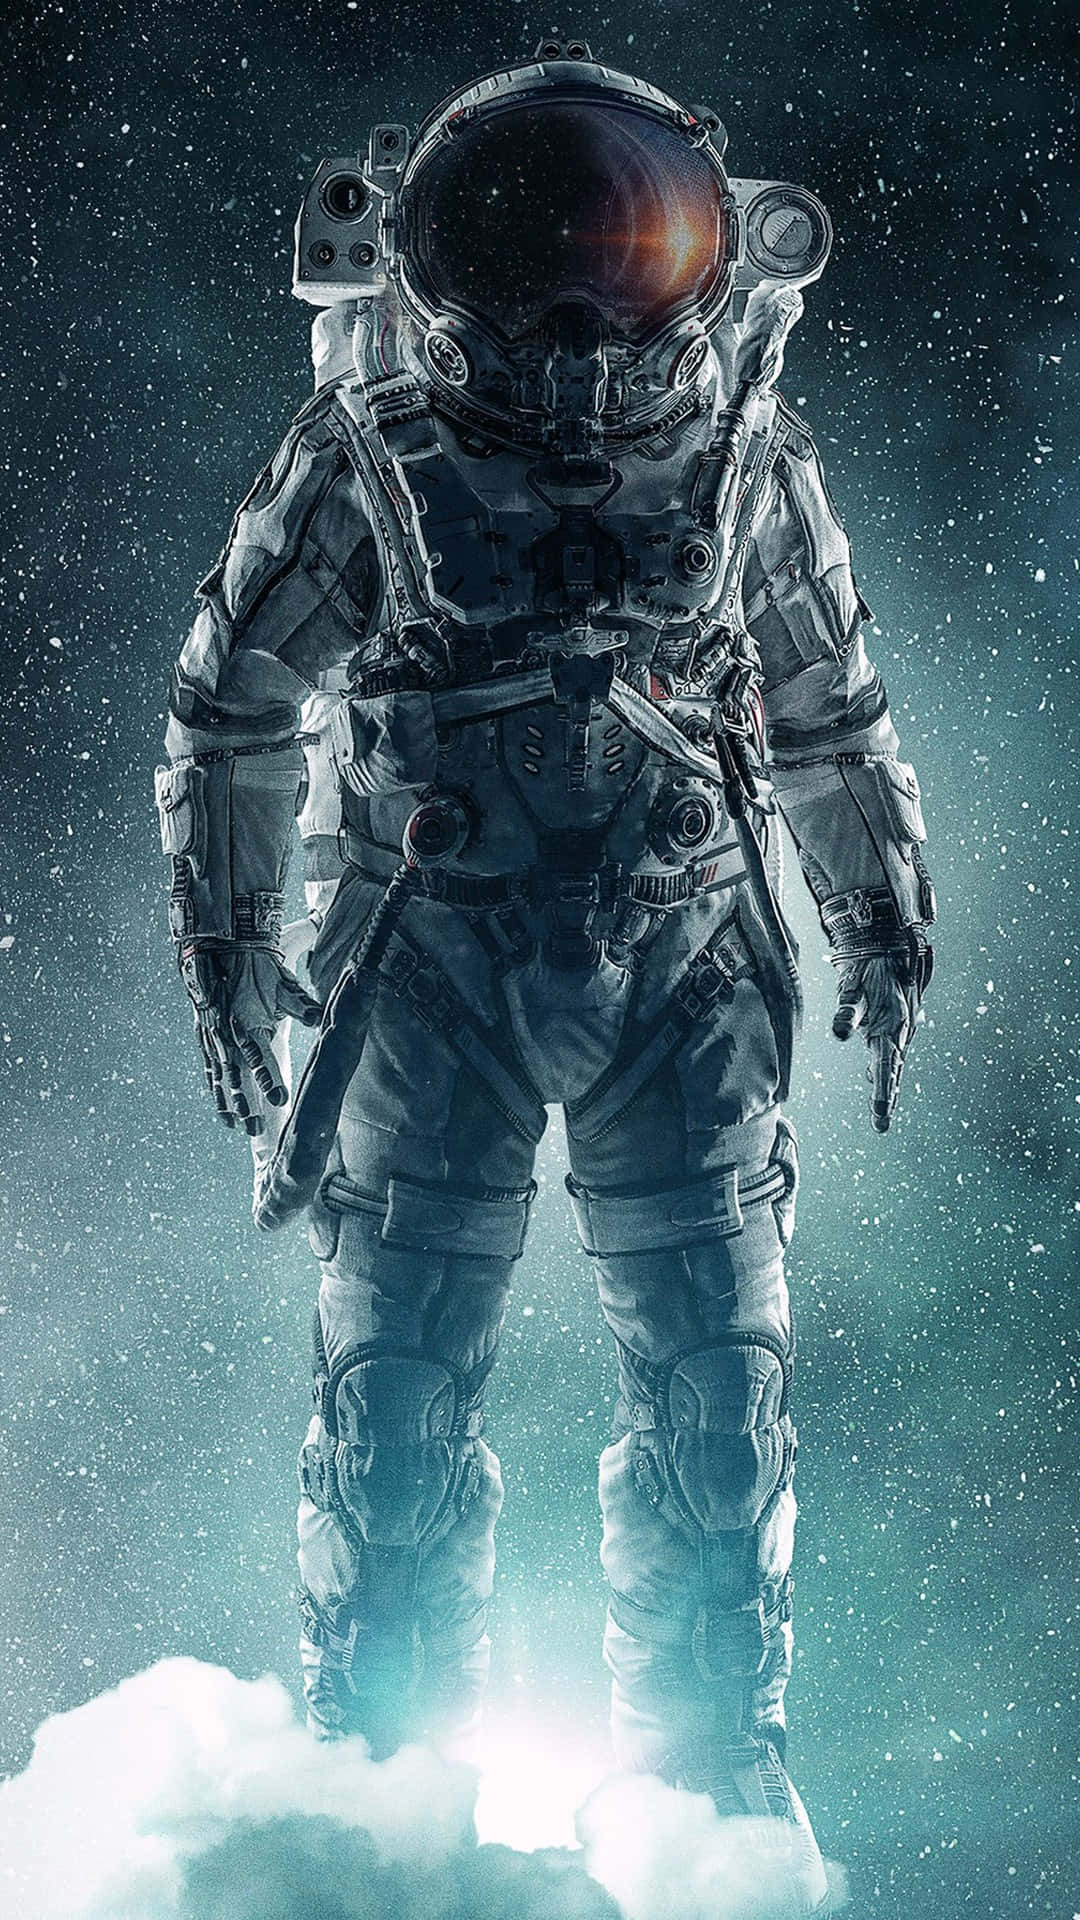 Free Astronaut Wallpaper Downloads, [400+] Astronaut Wallpapers for FREE |  